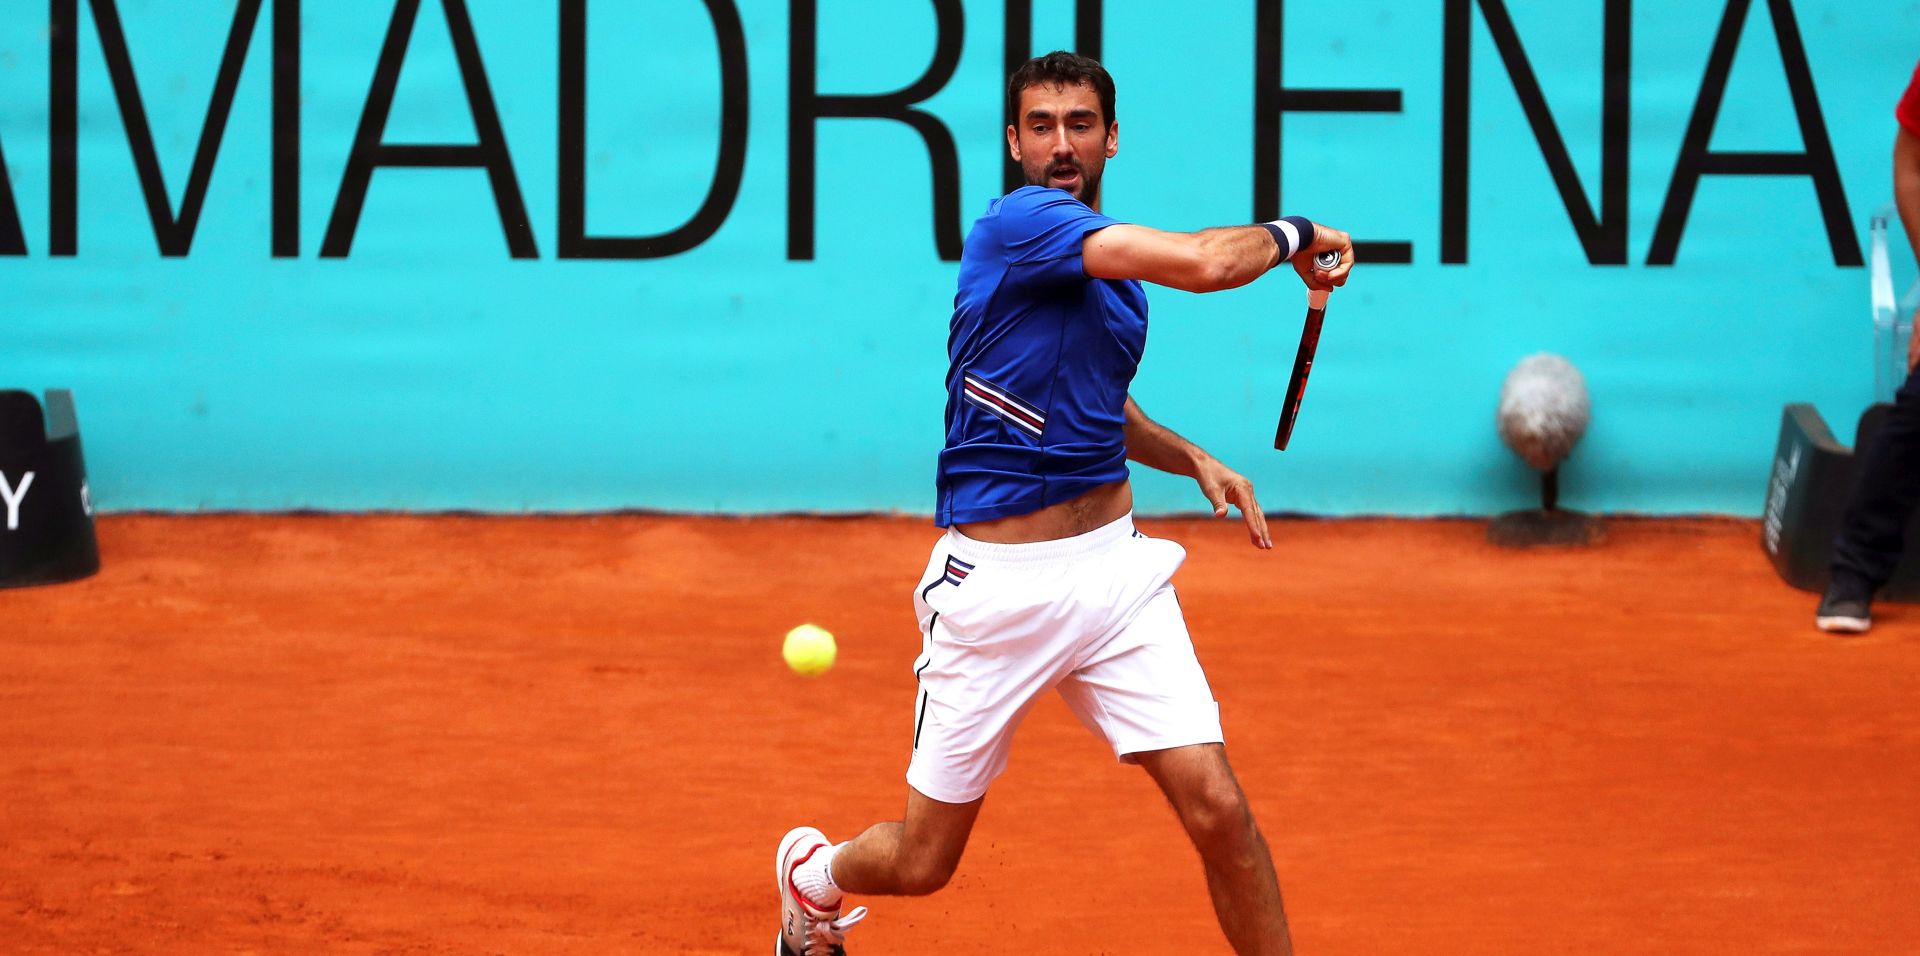 epa07551396 Marin Cilic of Croatia in action against Martin Klizan of Slovakia during their first round match of the Mutua Madrid Open tennis tournament at the Caja Magica complex in Madrid, Spain, 06 May 2019.  EPA/KIKO HUESCA